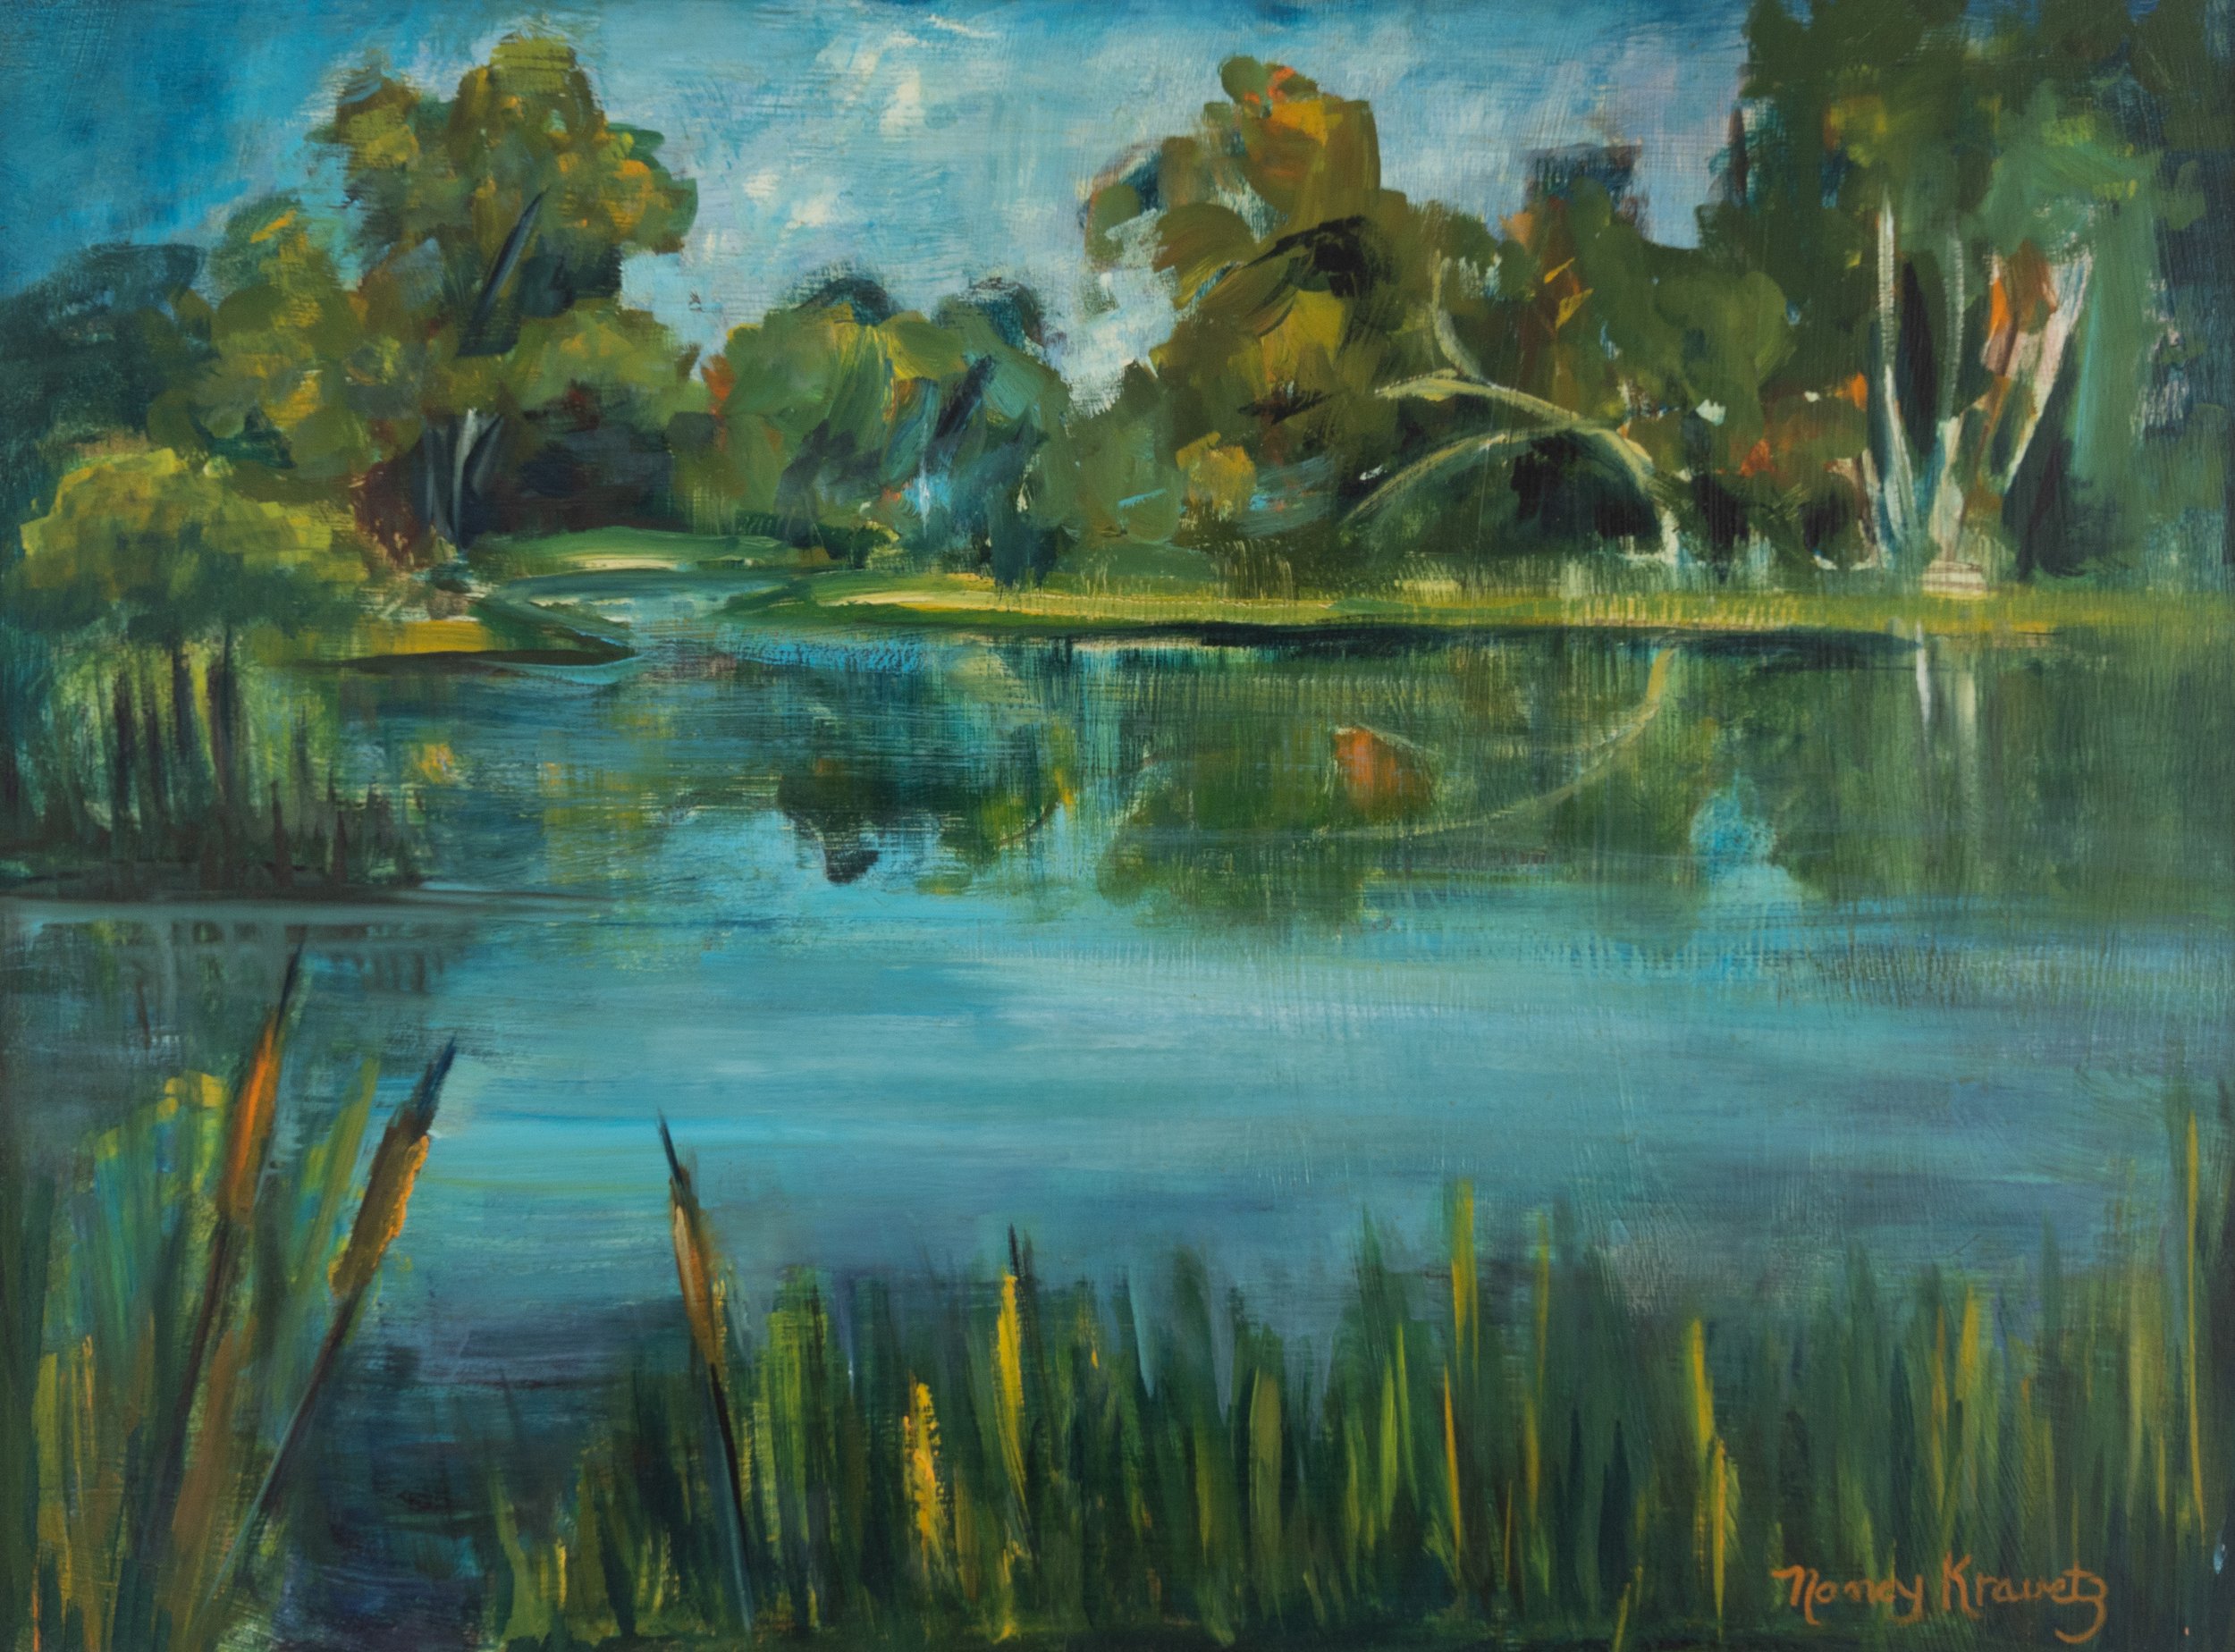 A Day at the Lakes, 1969, oil on masonite, 18x24 inches